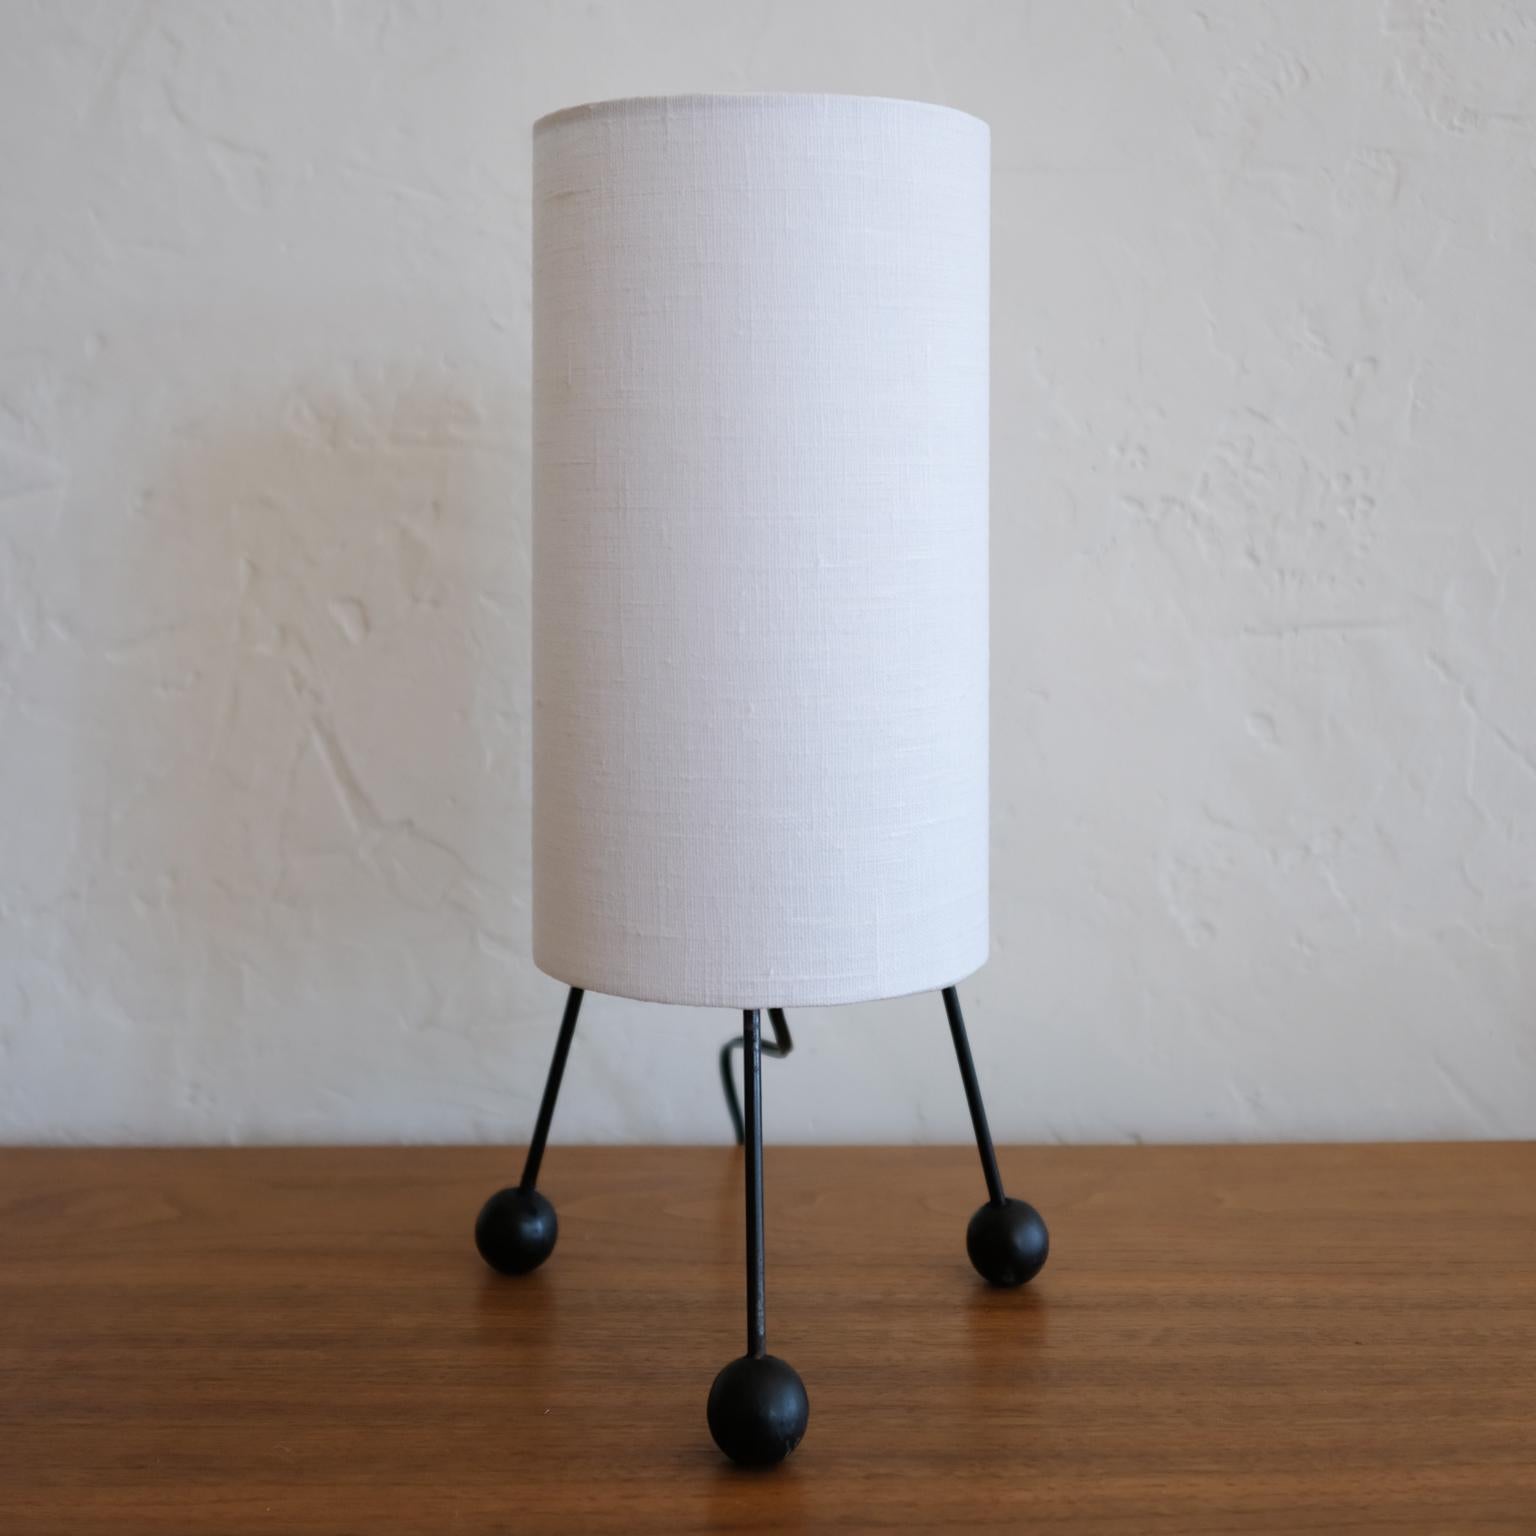 Tripod cylinder table lamp with wood ball feet. New linen shade, 1950s.